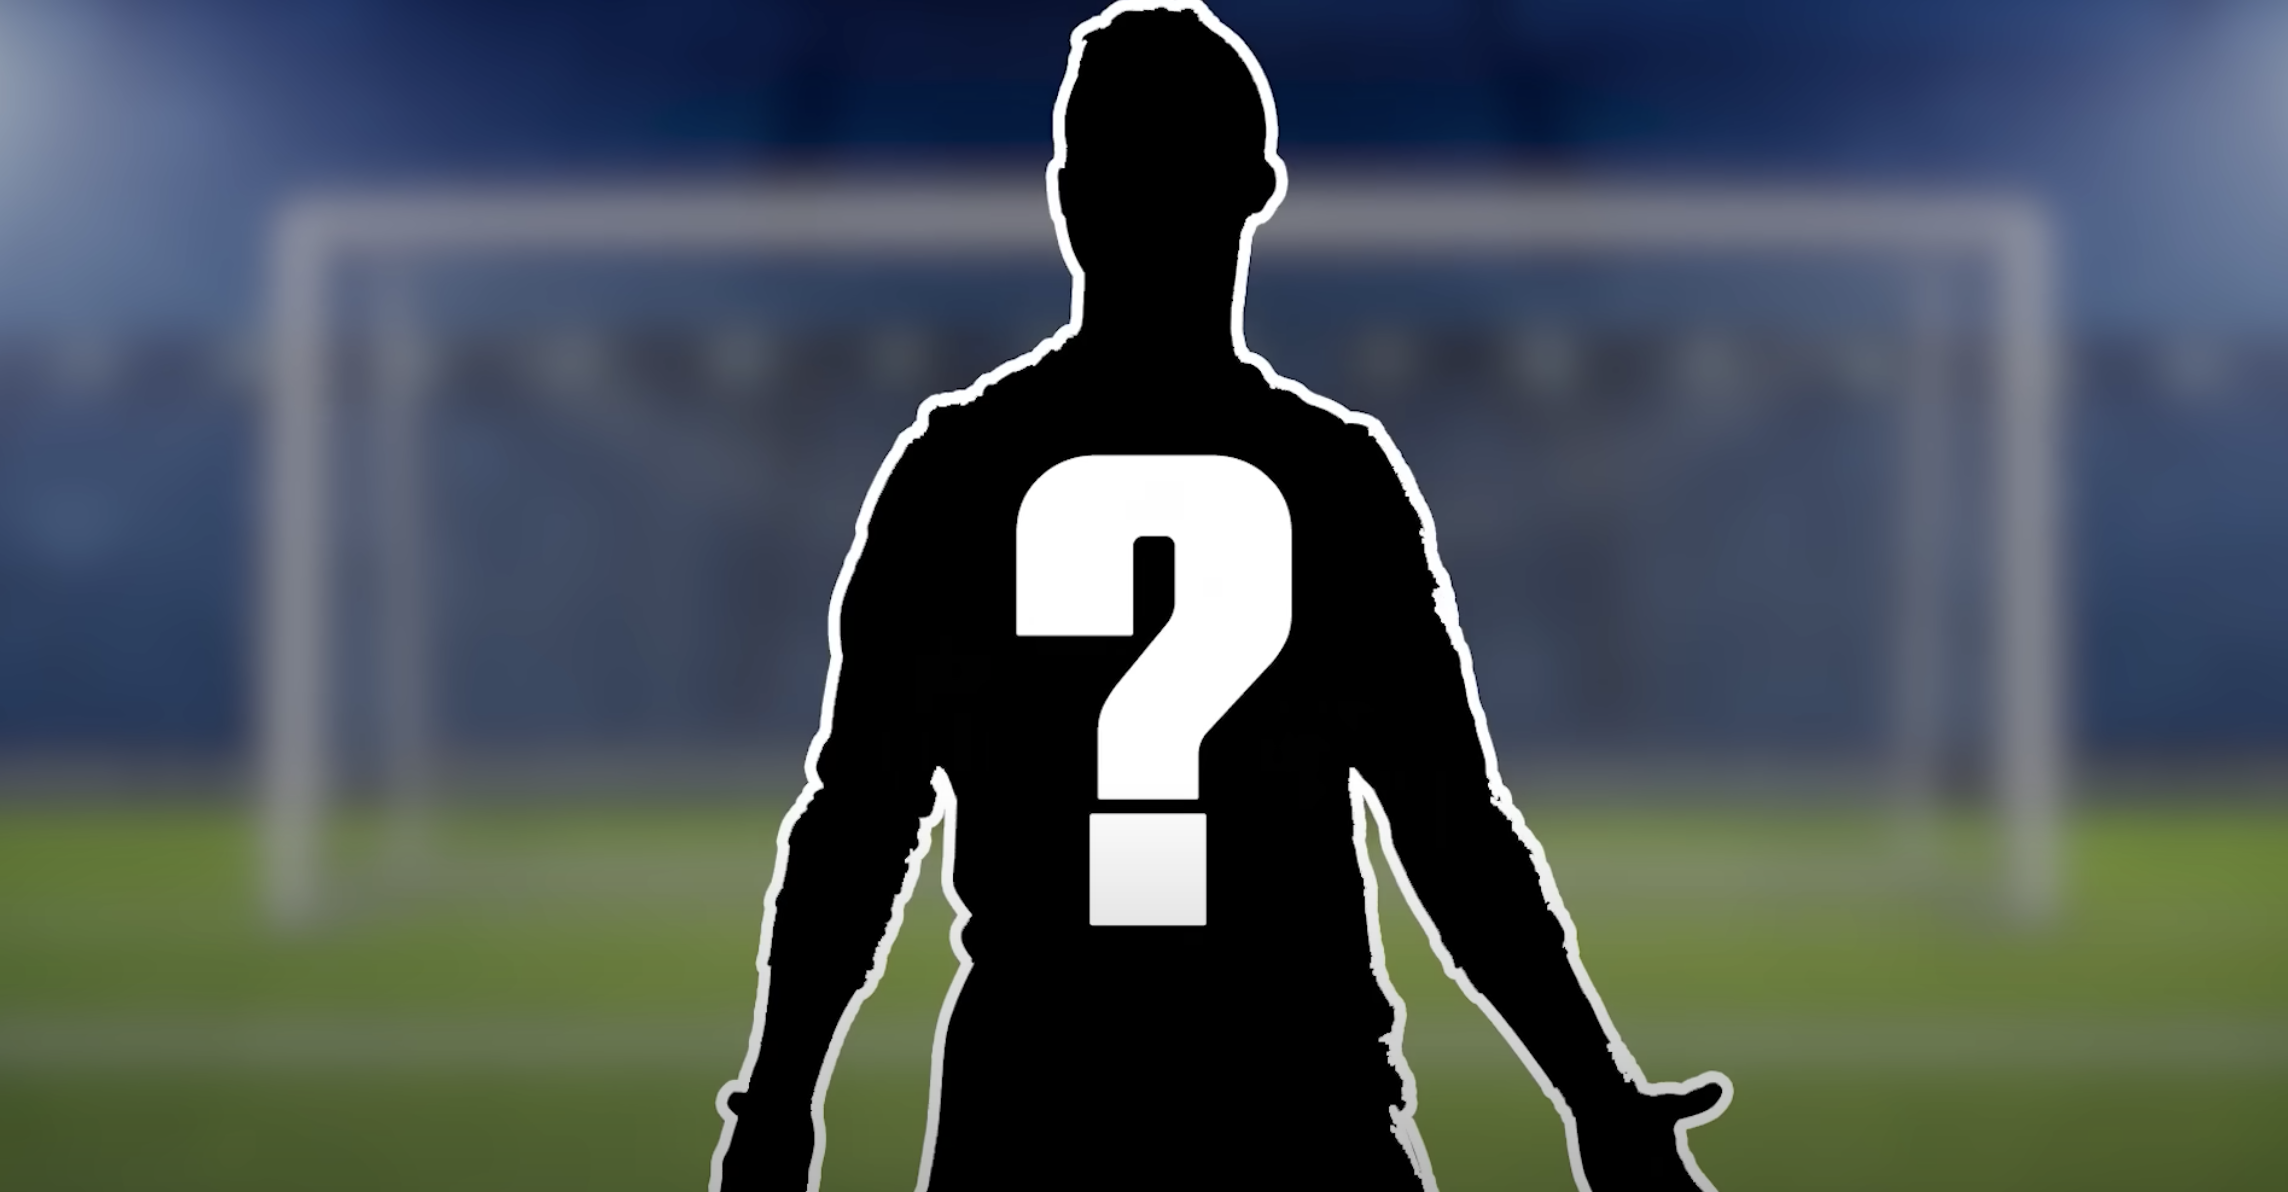 Who Are Ya? - World Cup Quiz